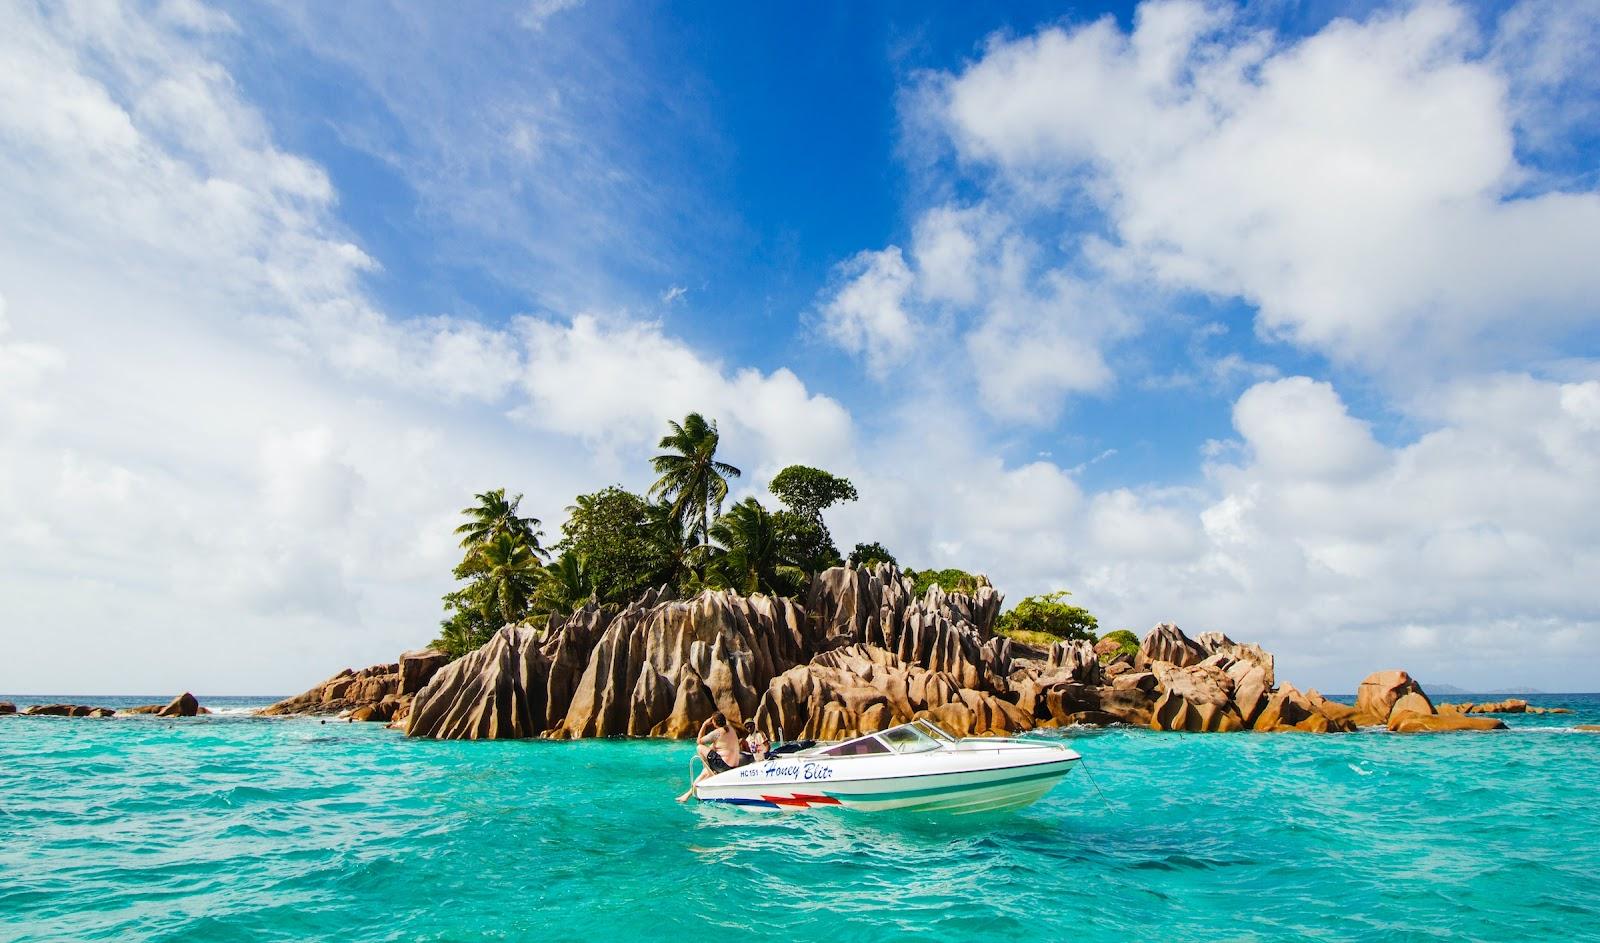 A perfect tropical island and a speed boat.